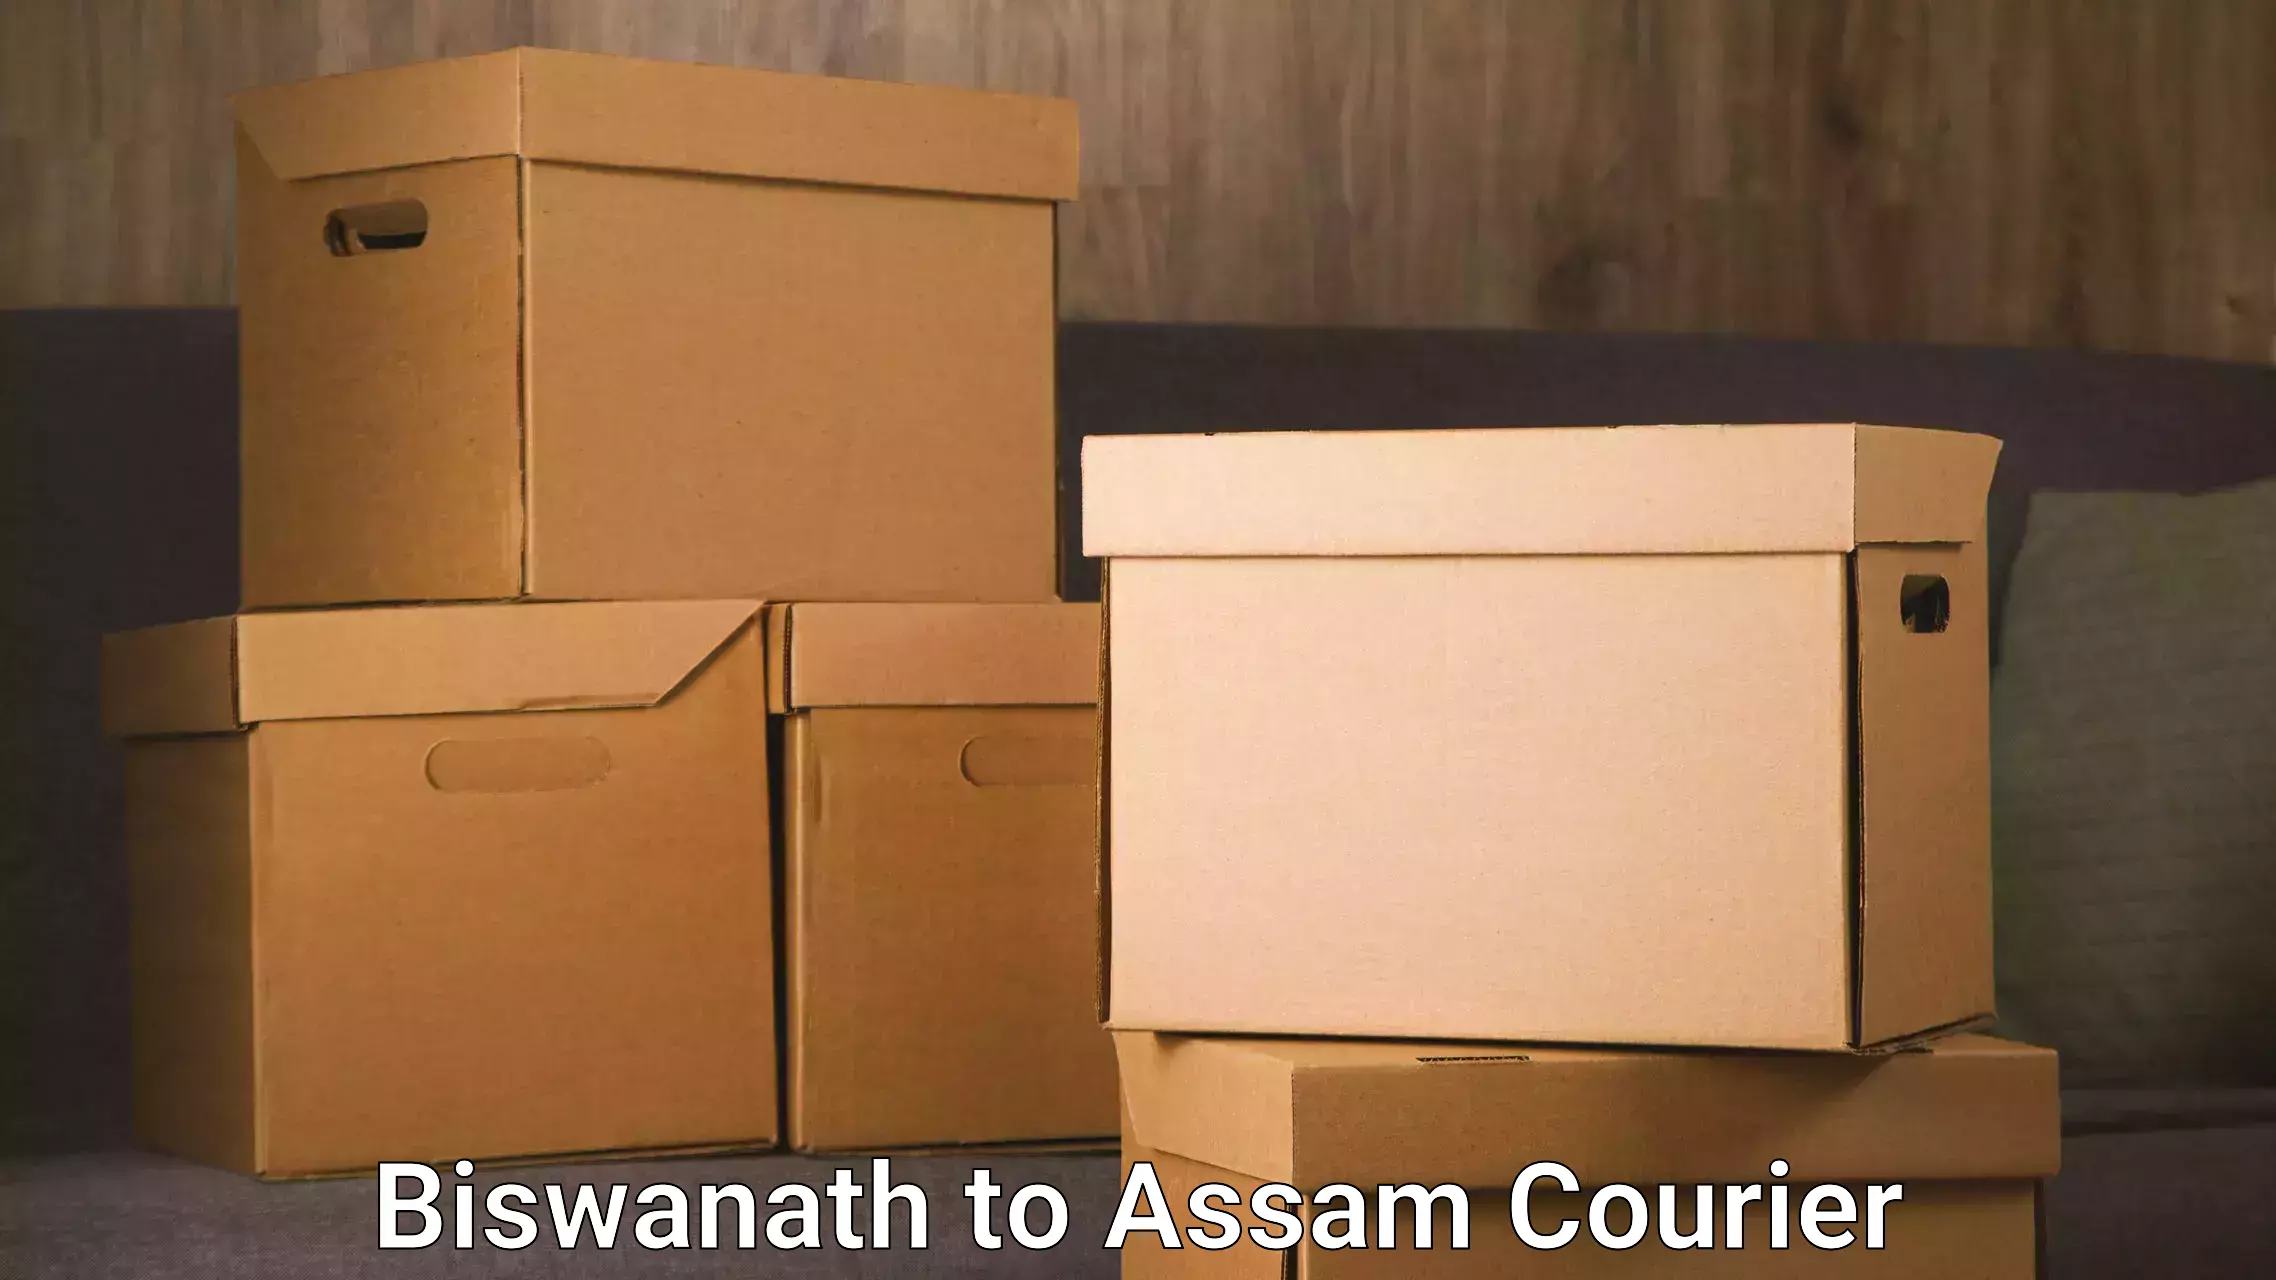 Speedy delivery service Biswanath to Baihata